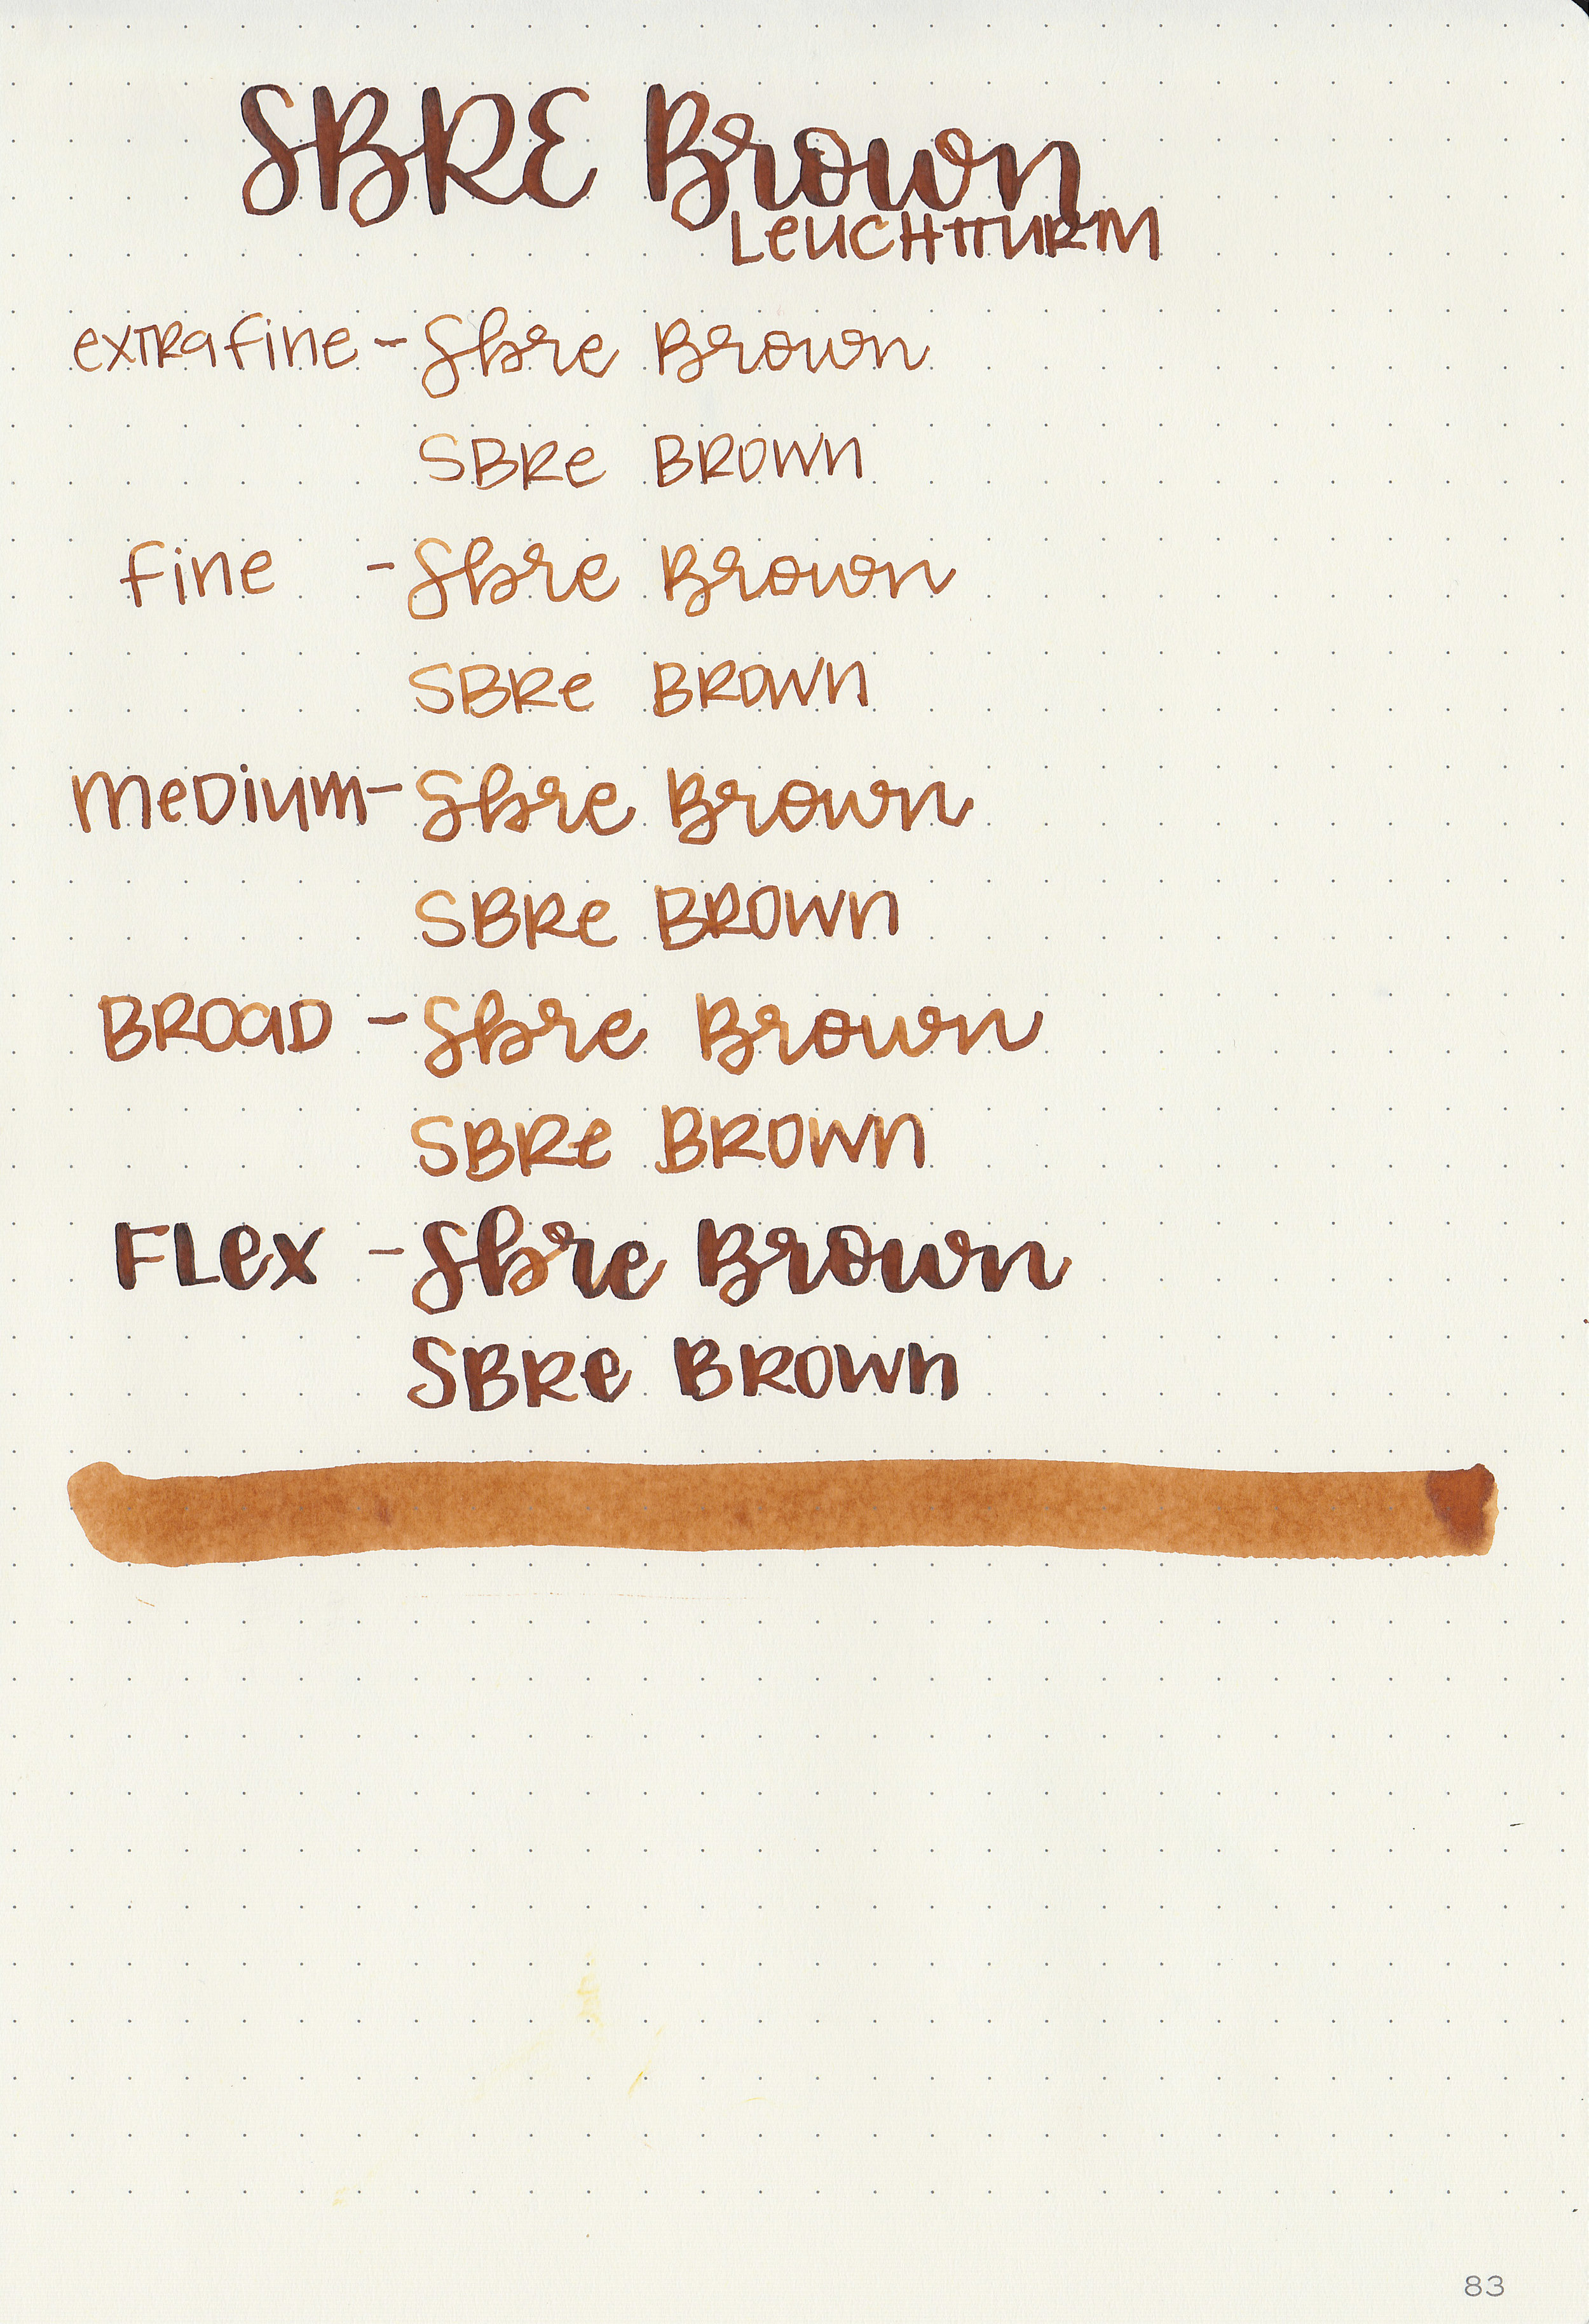 Ink Review #250: SBRE Brown — Mountain of Ink